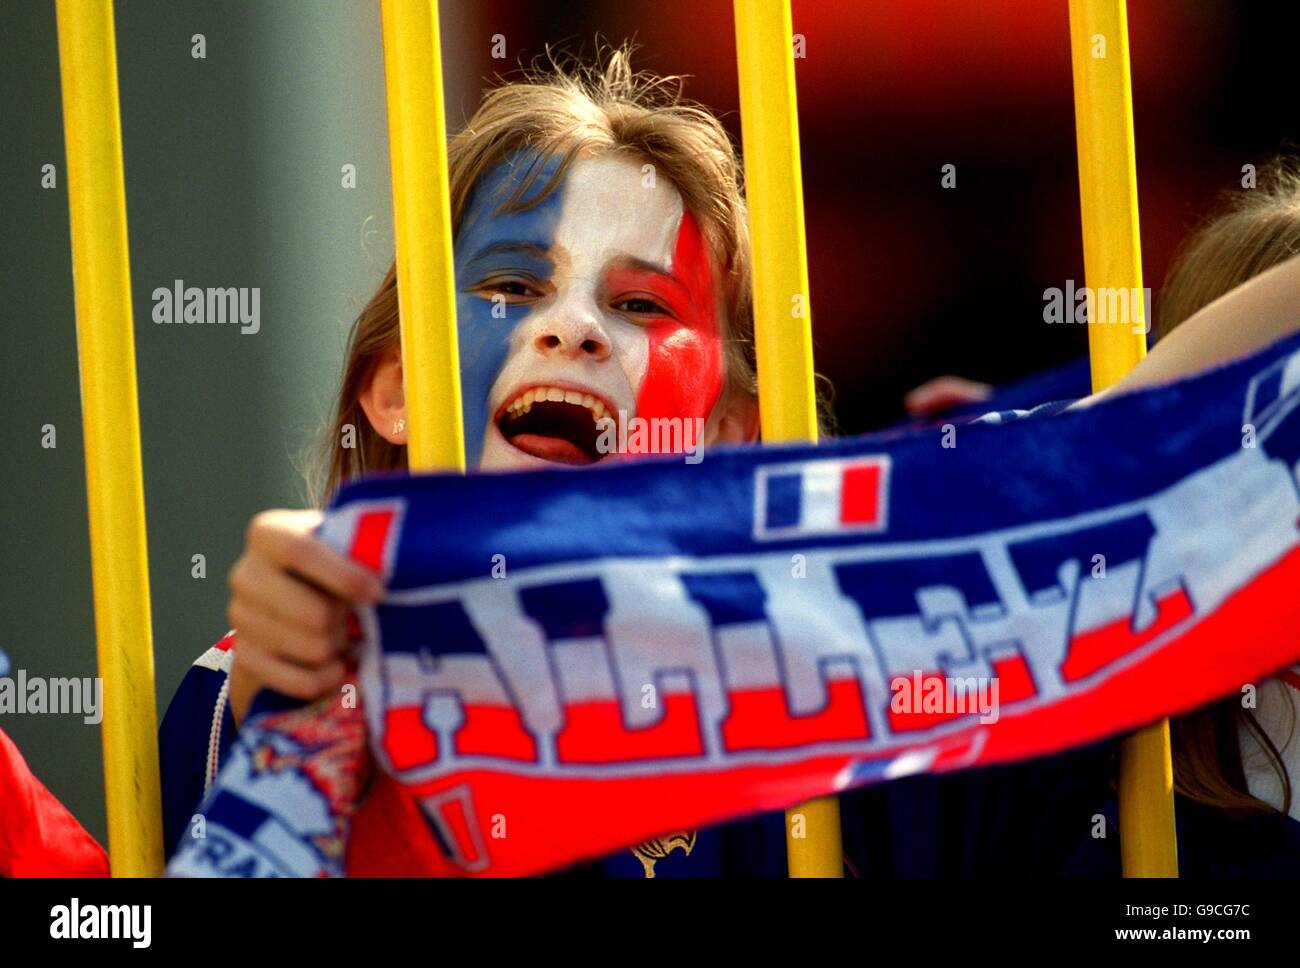 Soccer - Euro 2000 - Group D - Czech Republic v France. A young French fan shows support for her team Stock Photo